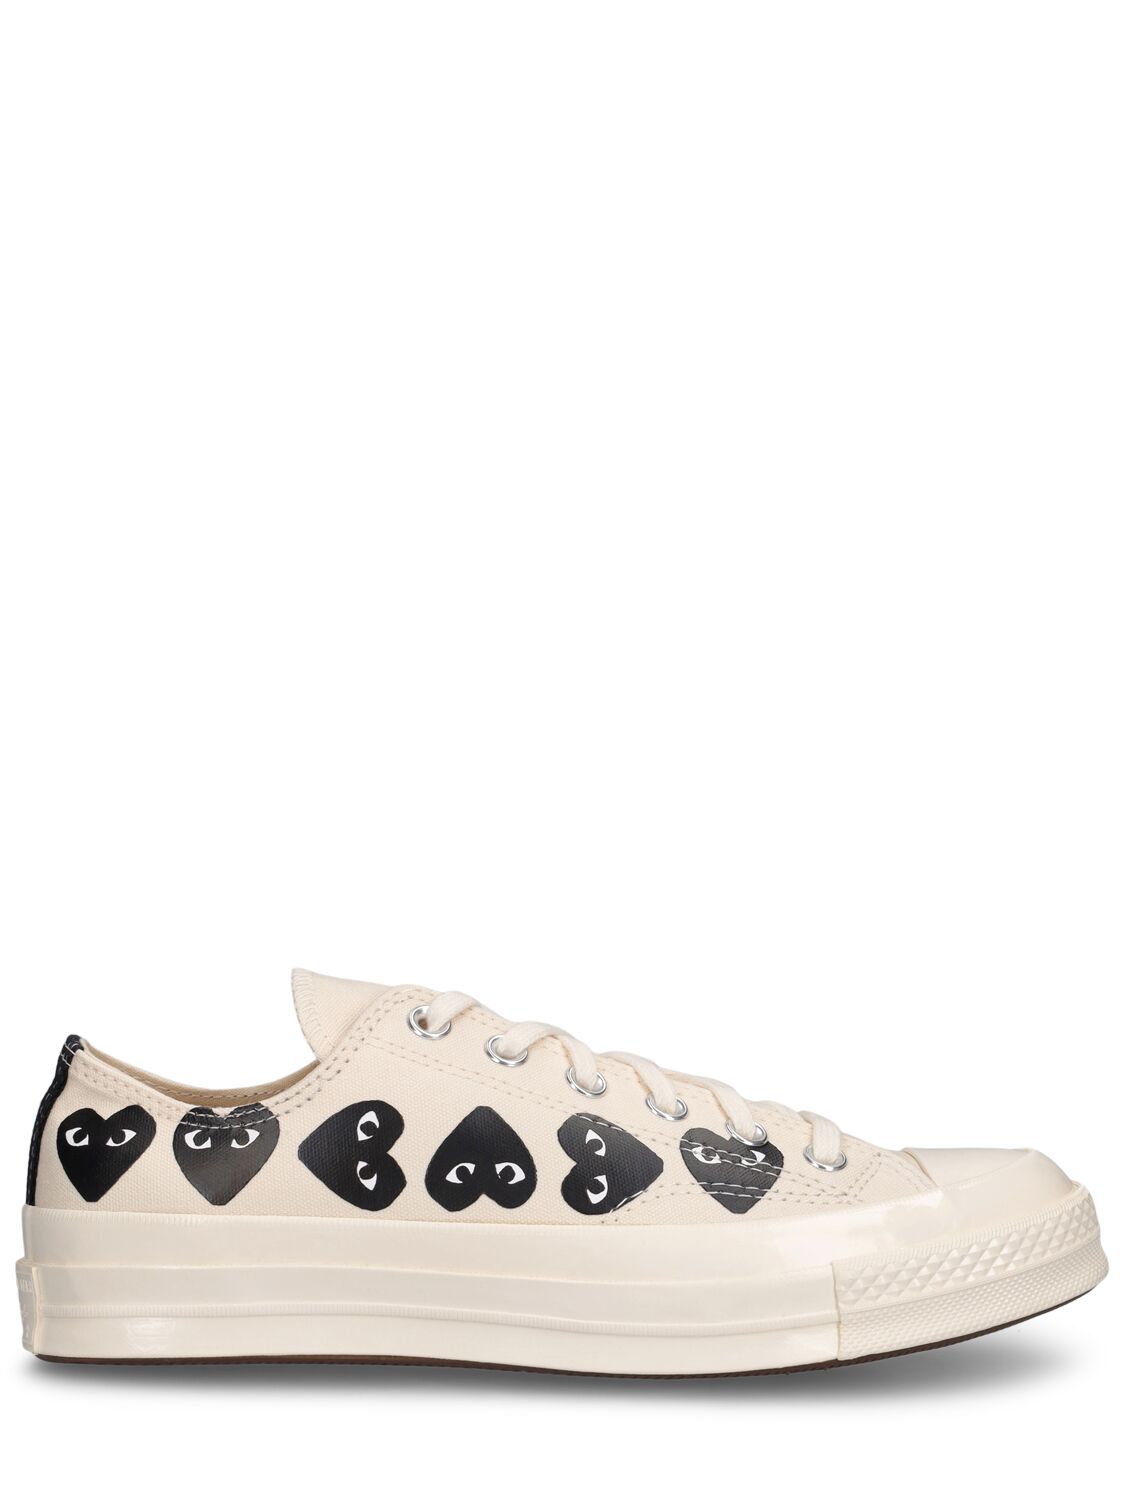 Image of Converse Canvas Low Top Sneakers